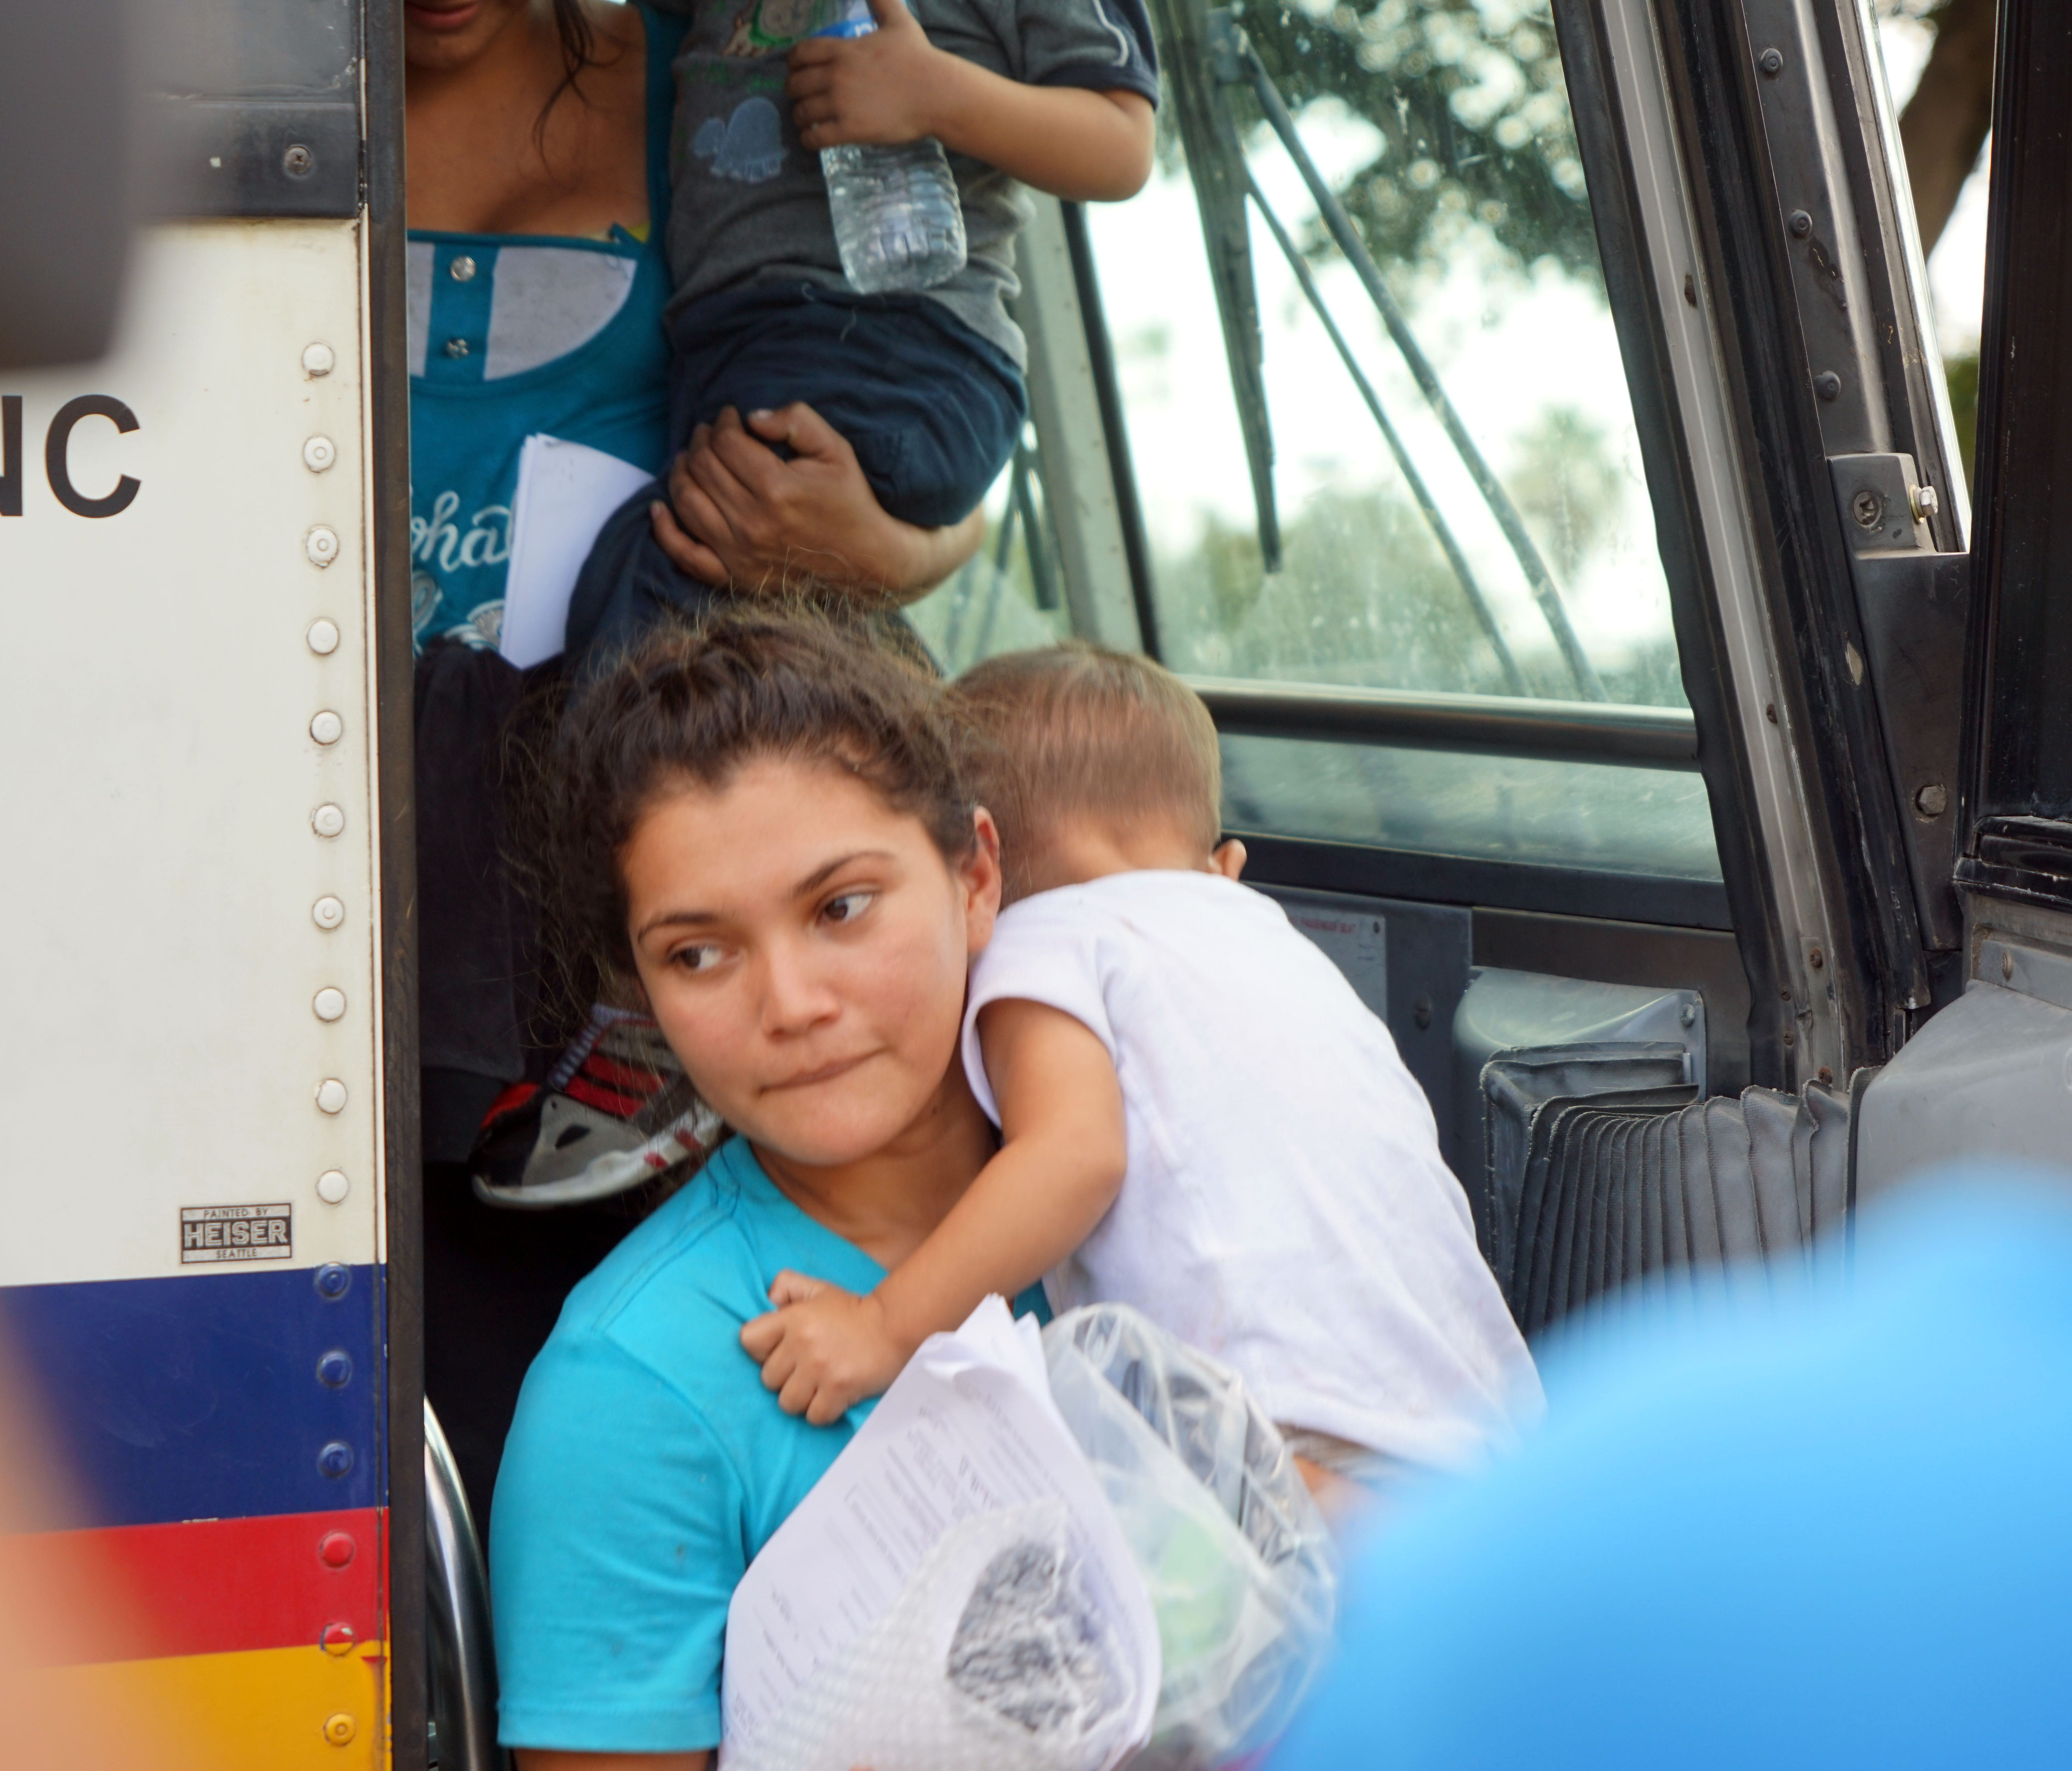 Migrants released from federal custody exit a bus after leaving a federal detention center in McAllen, Texas, on June 22, 2018.